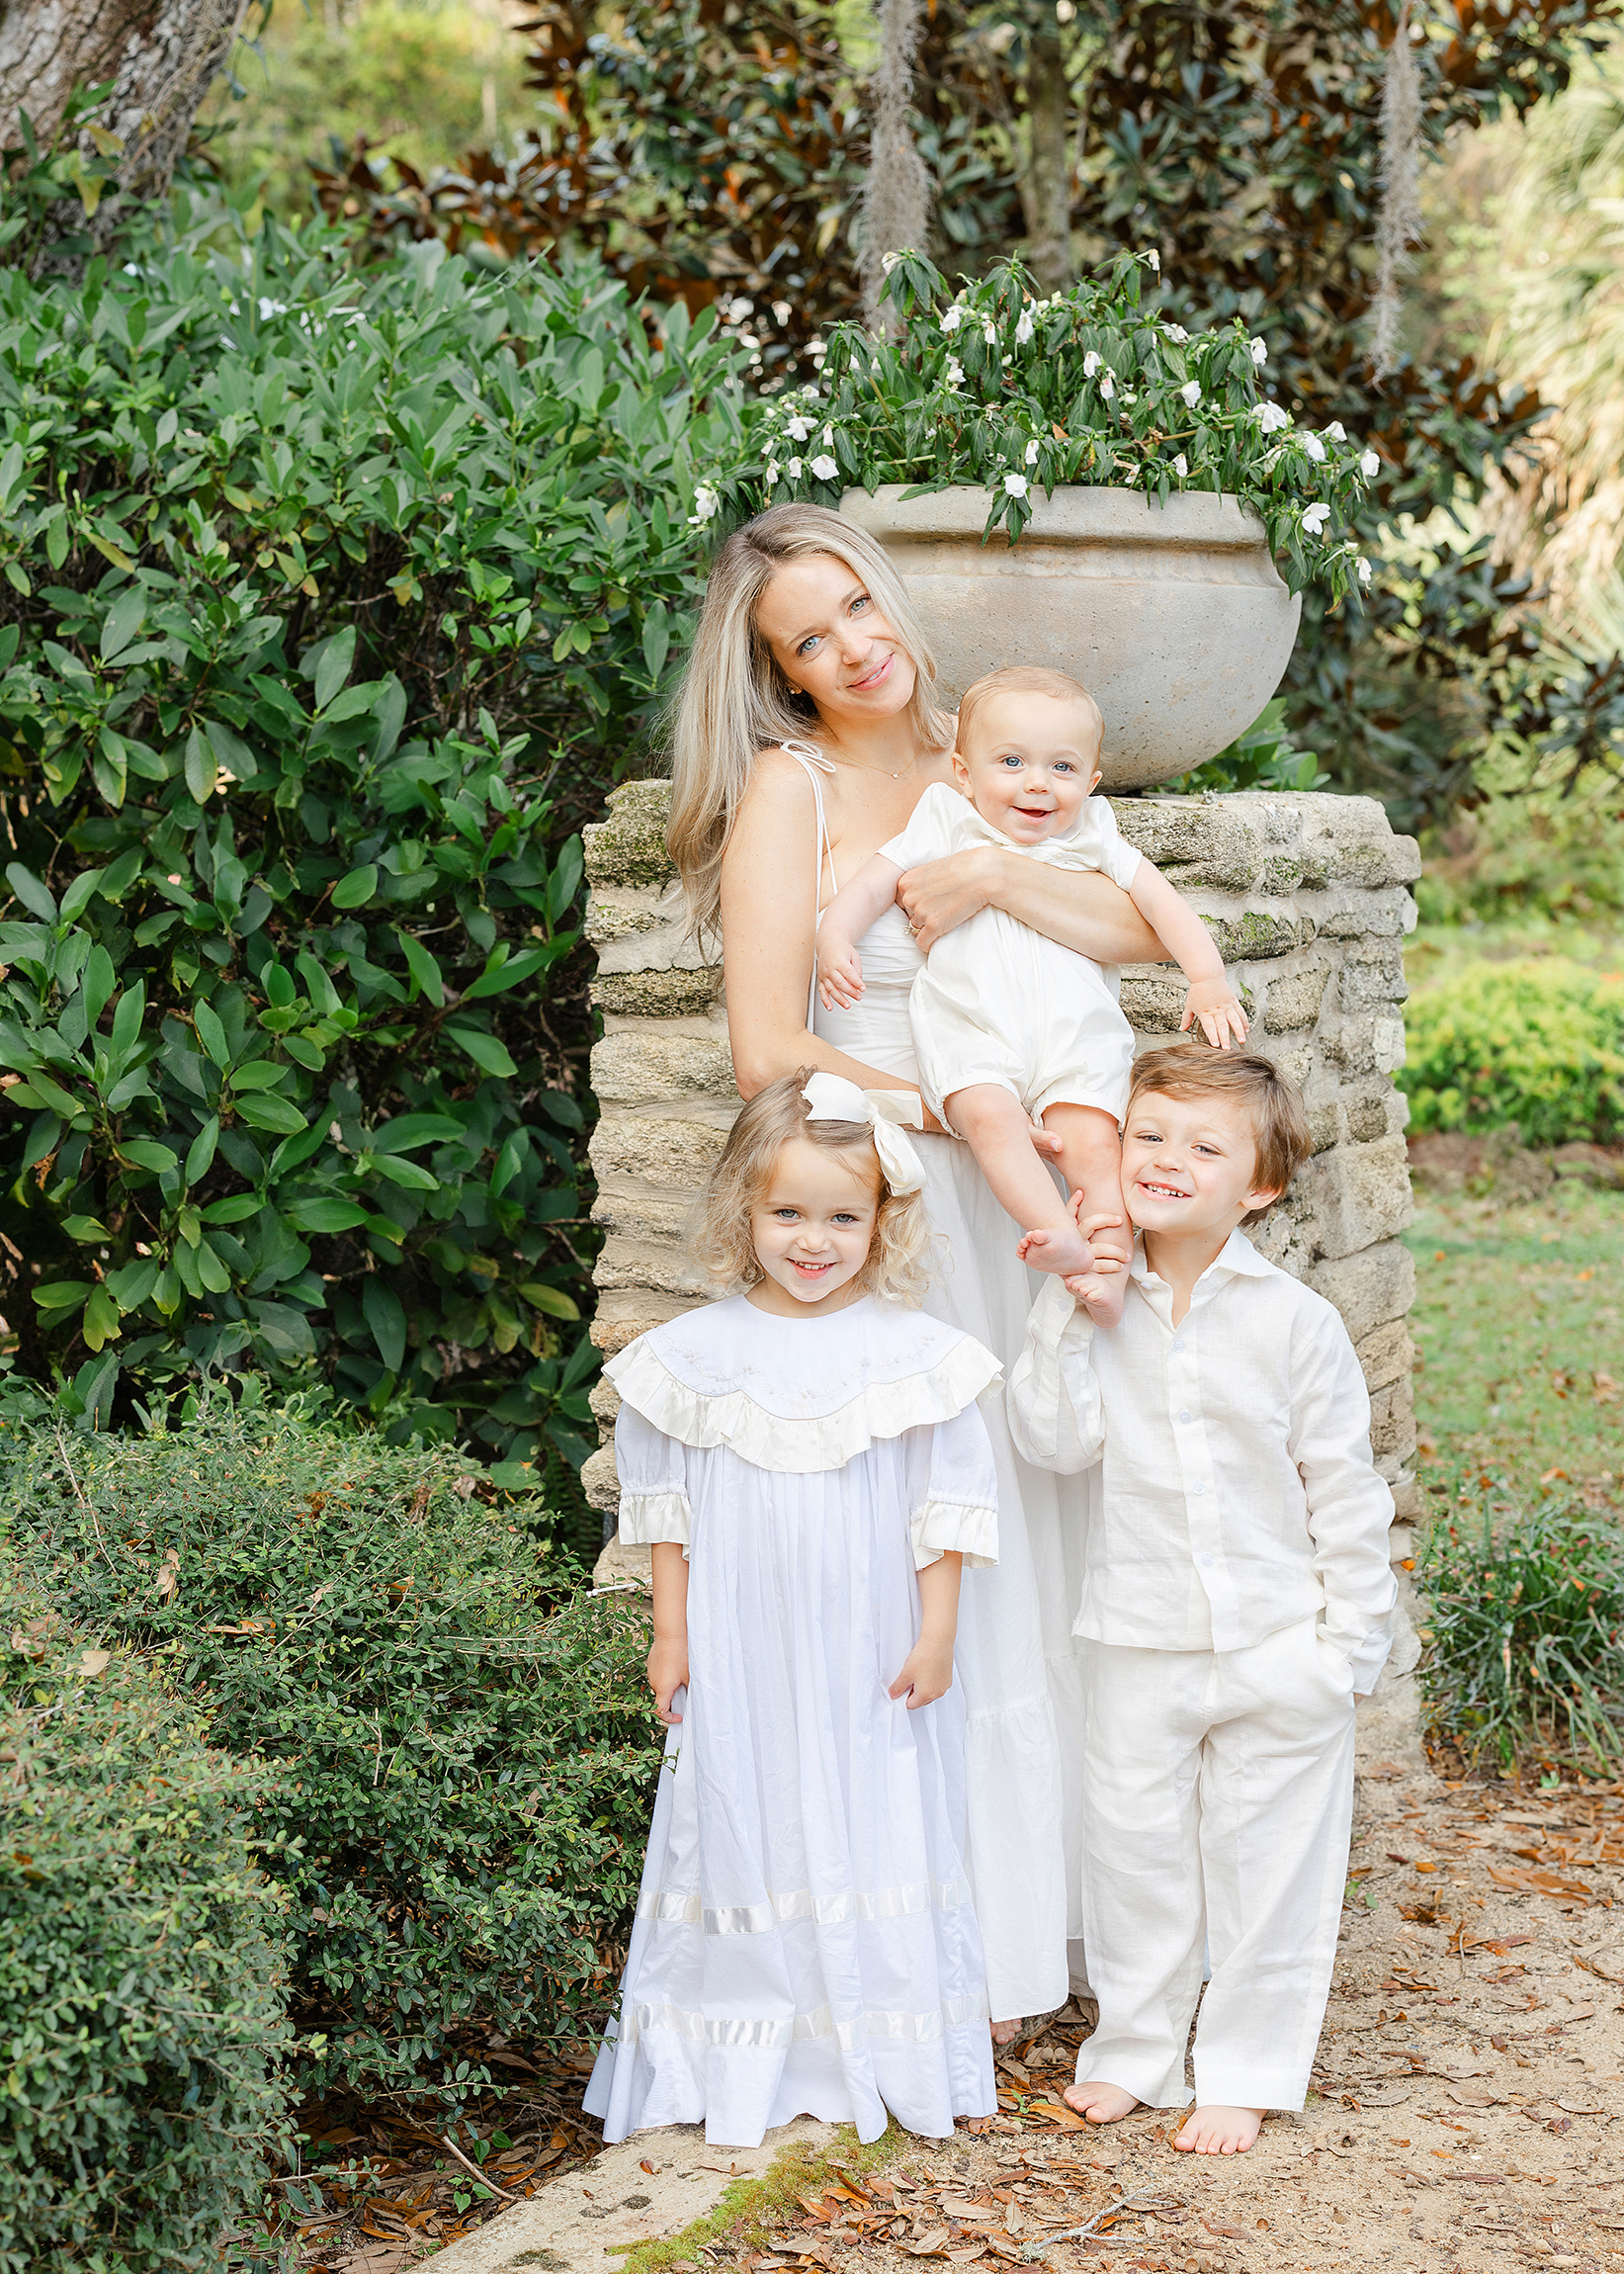 A spring portrait of a woman with her children all dressed in white in the gardens.